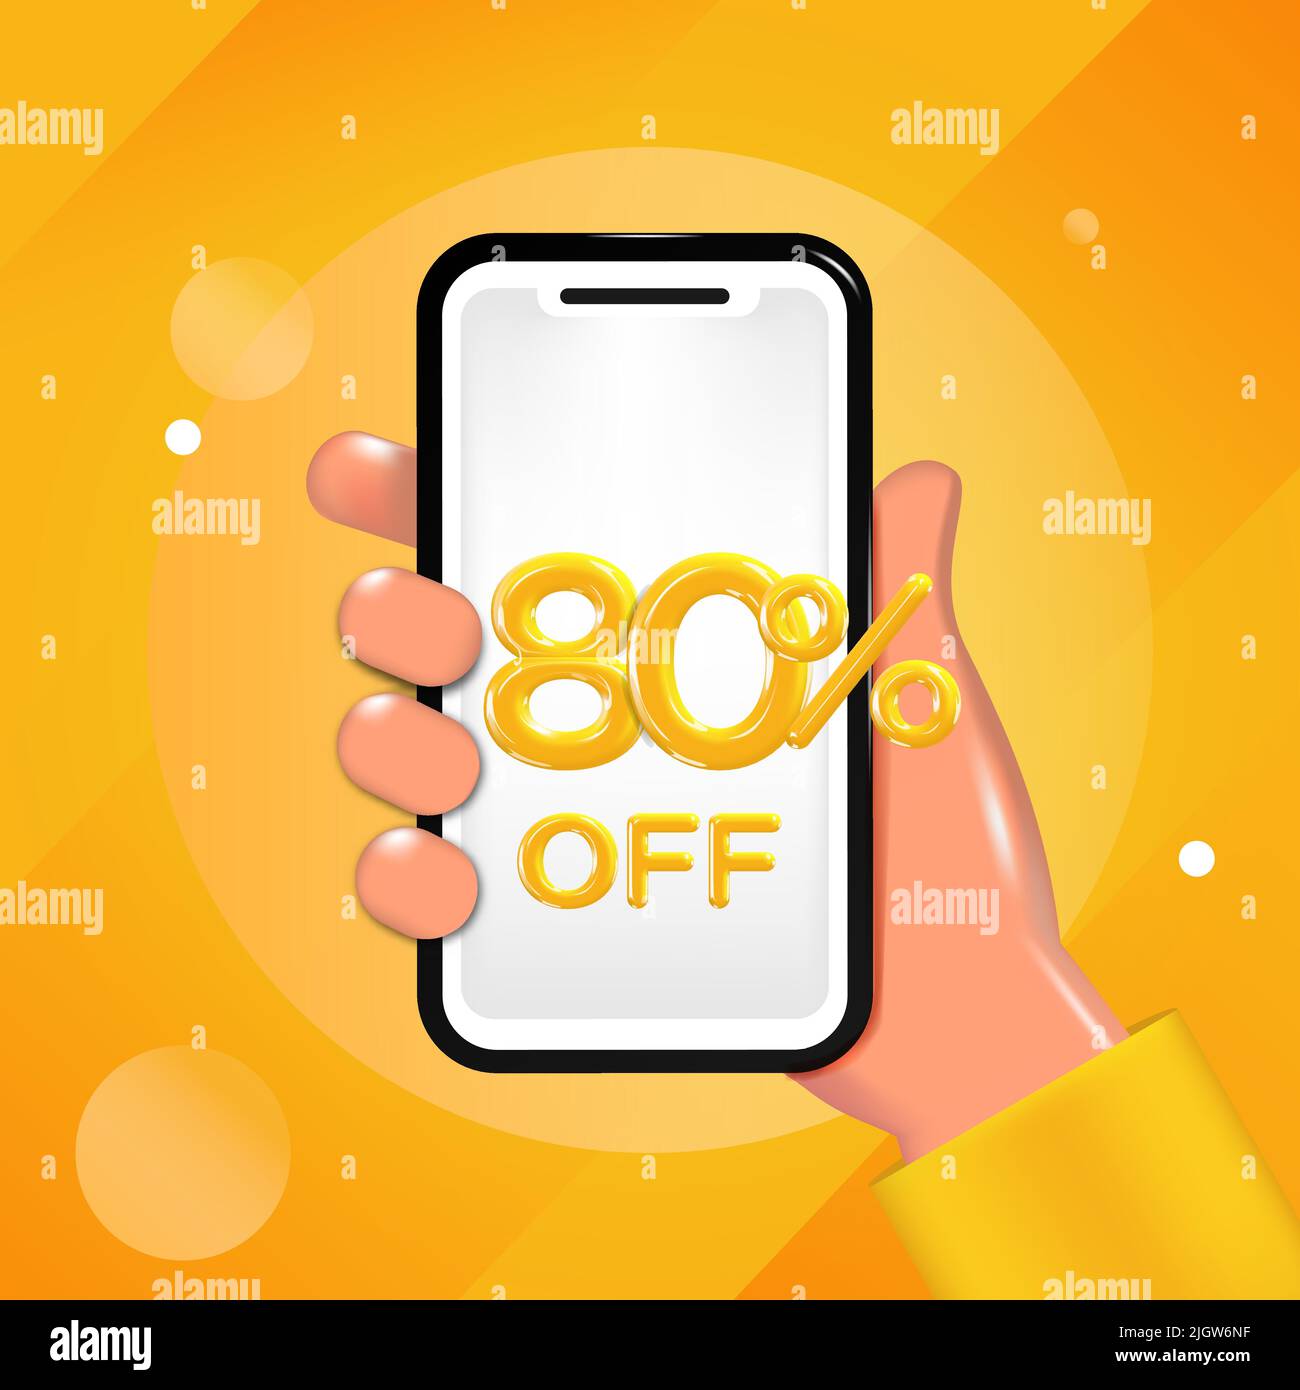 80 or Eighty percent off design. Hand holding a mobile phone with an offer message. Special discount promotion, sale poster template. Vector illustrat Stock Vector